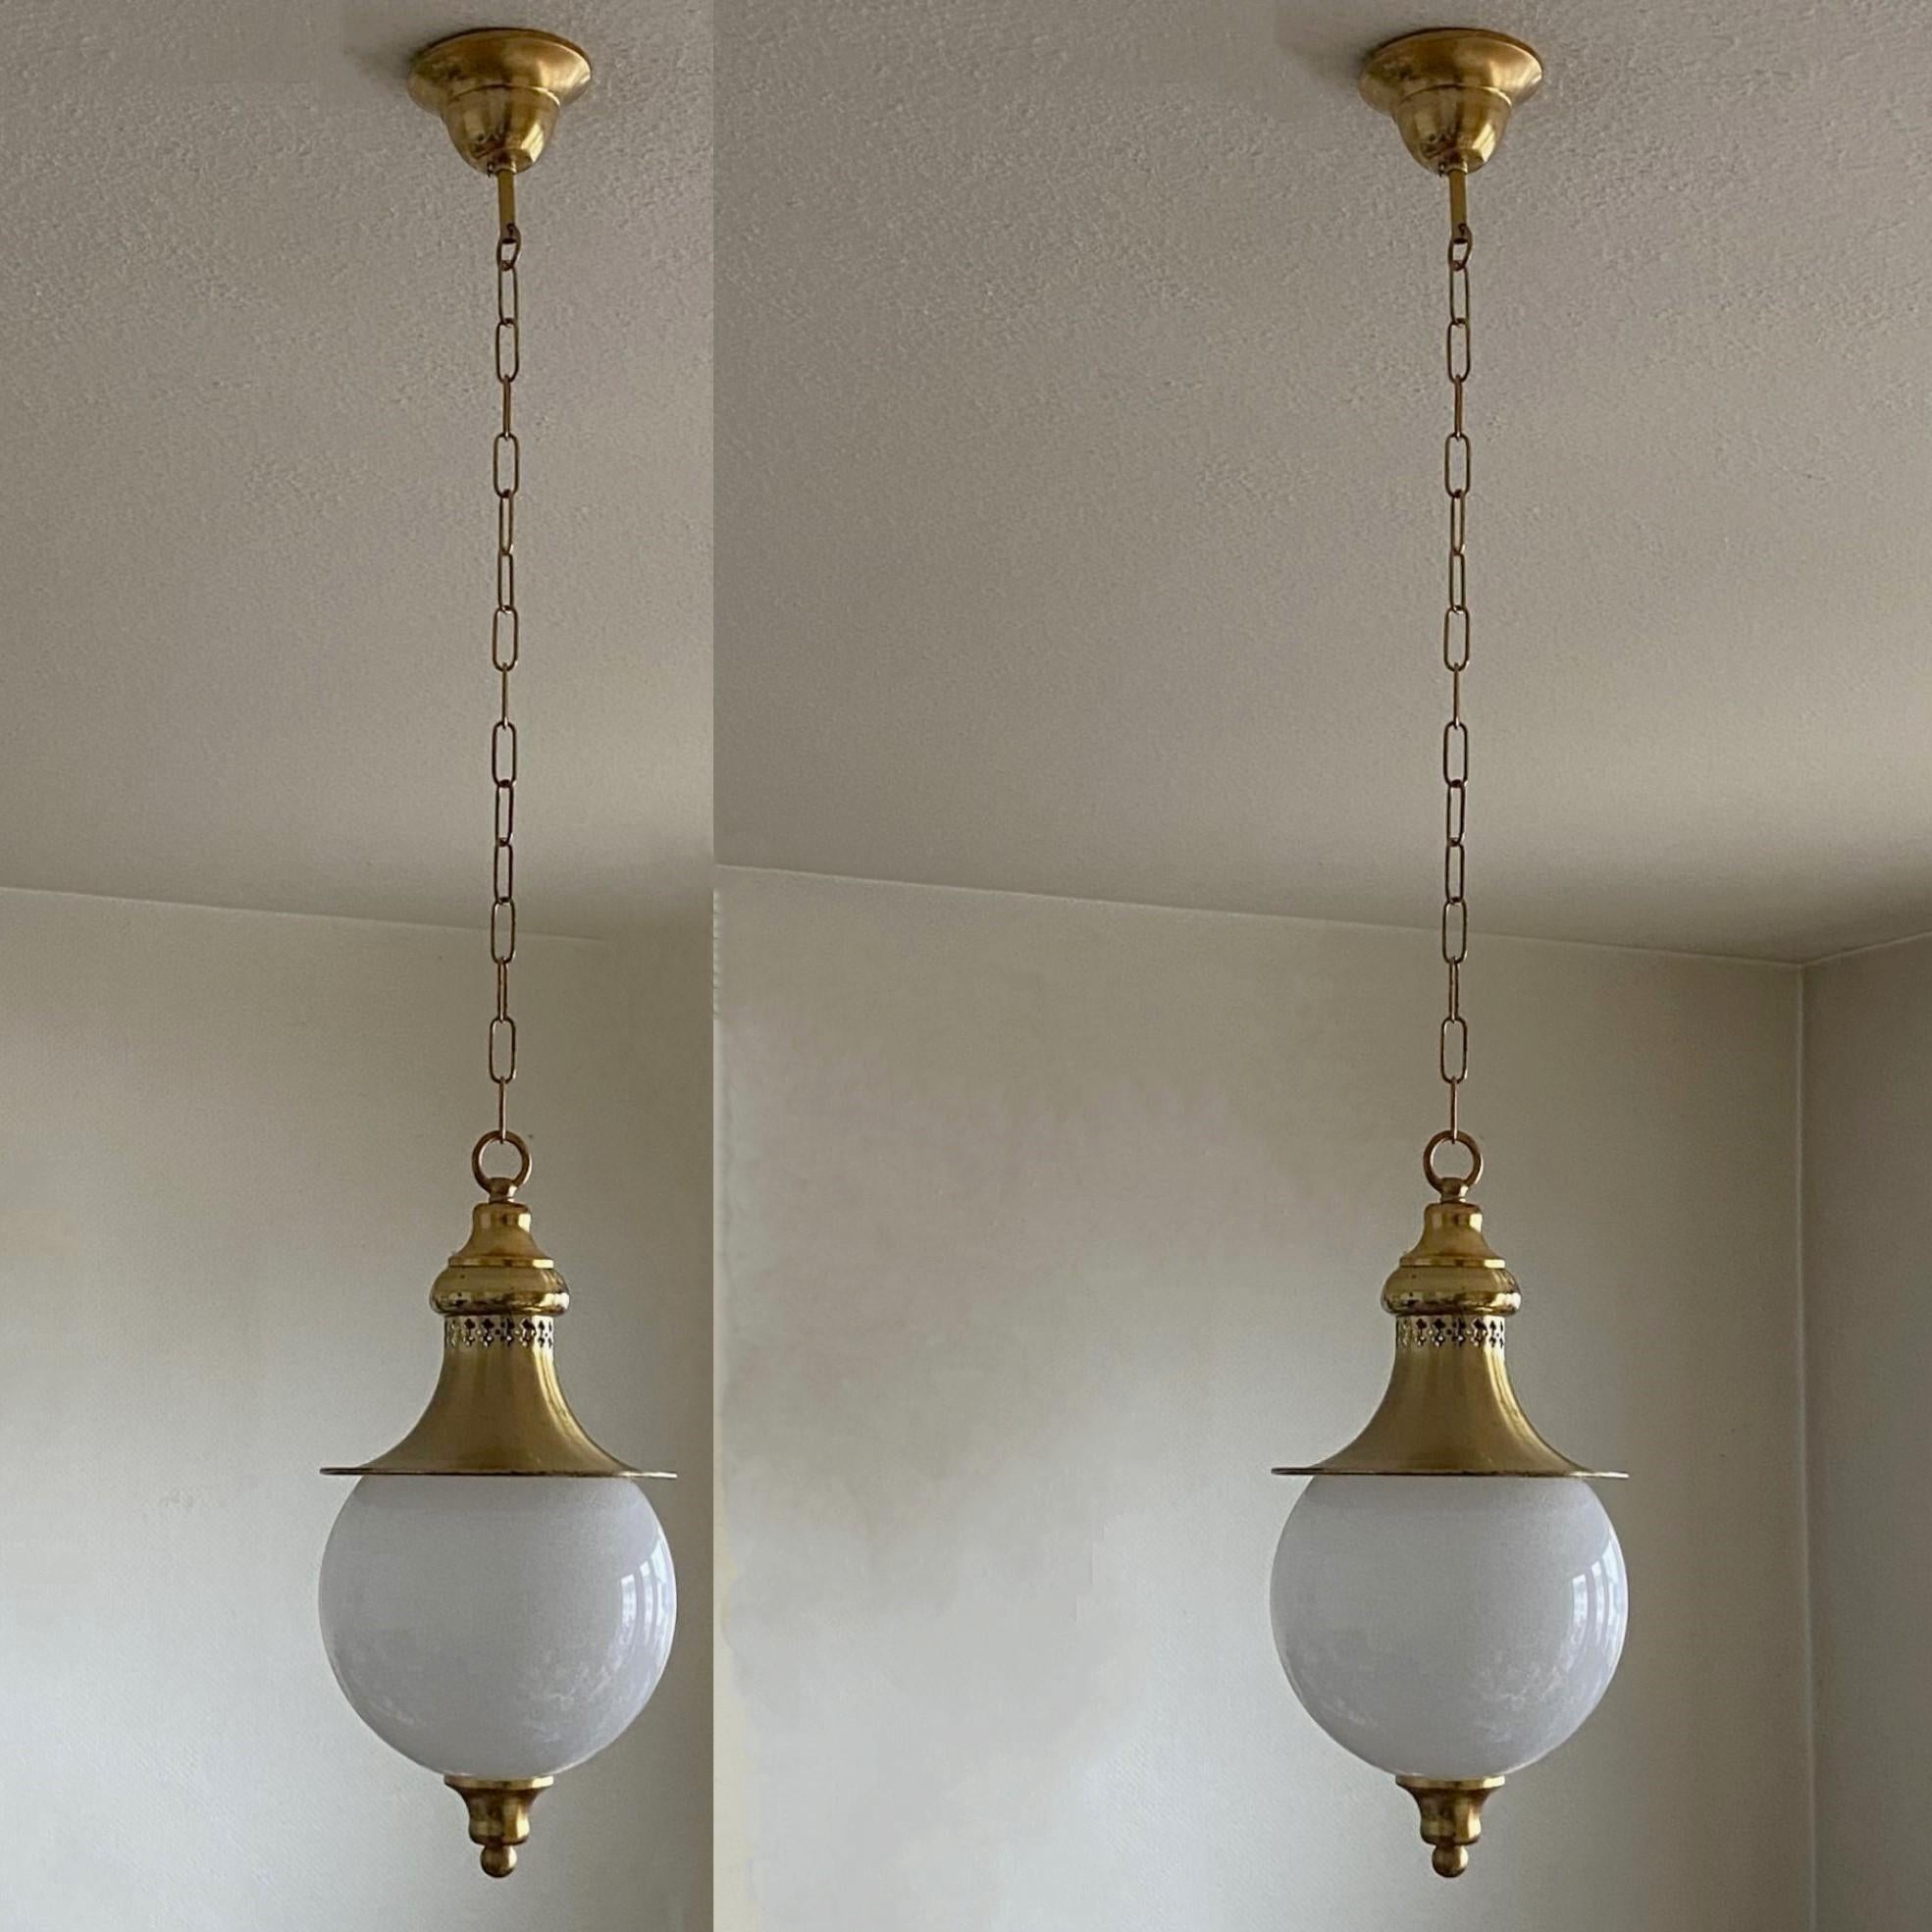 A beautiful and rare pair of hand-blown opaline glass ceiling pendants with brass gallery, England circa 1930.
Most unusual opaline glass ball with finial underneath brass shade with pierced details for light projection.
Brass with wear commensurate